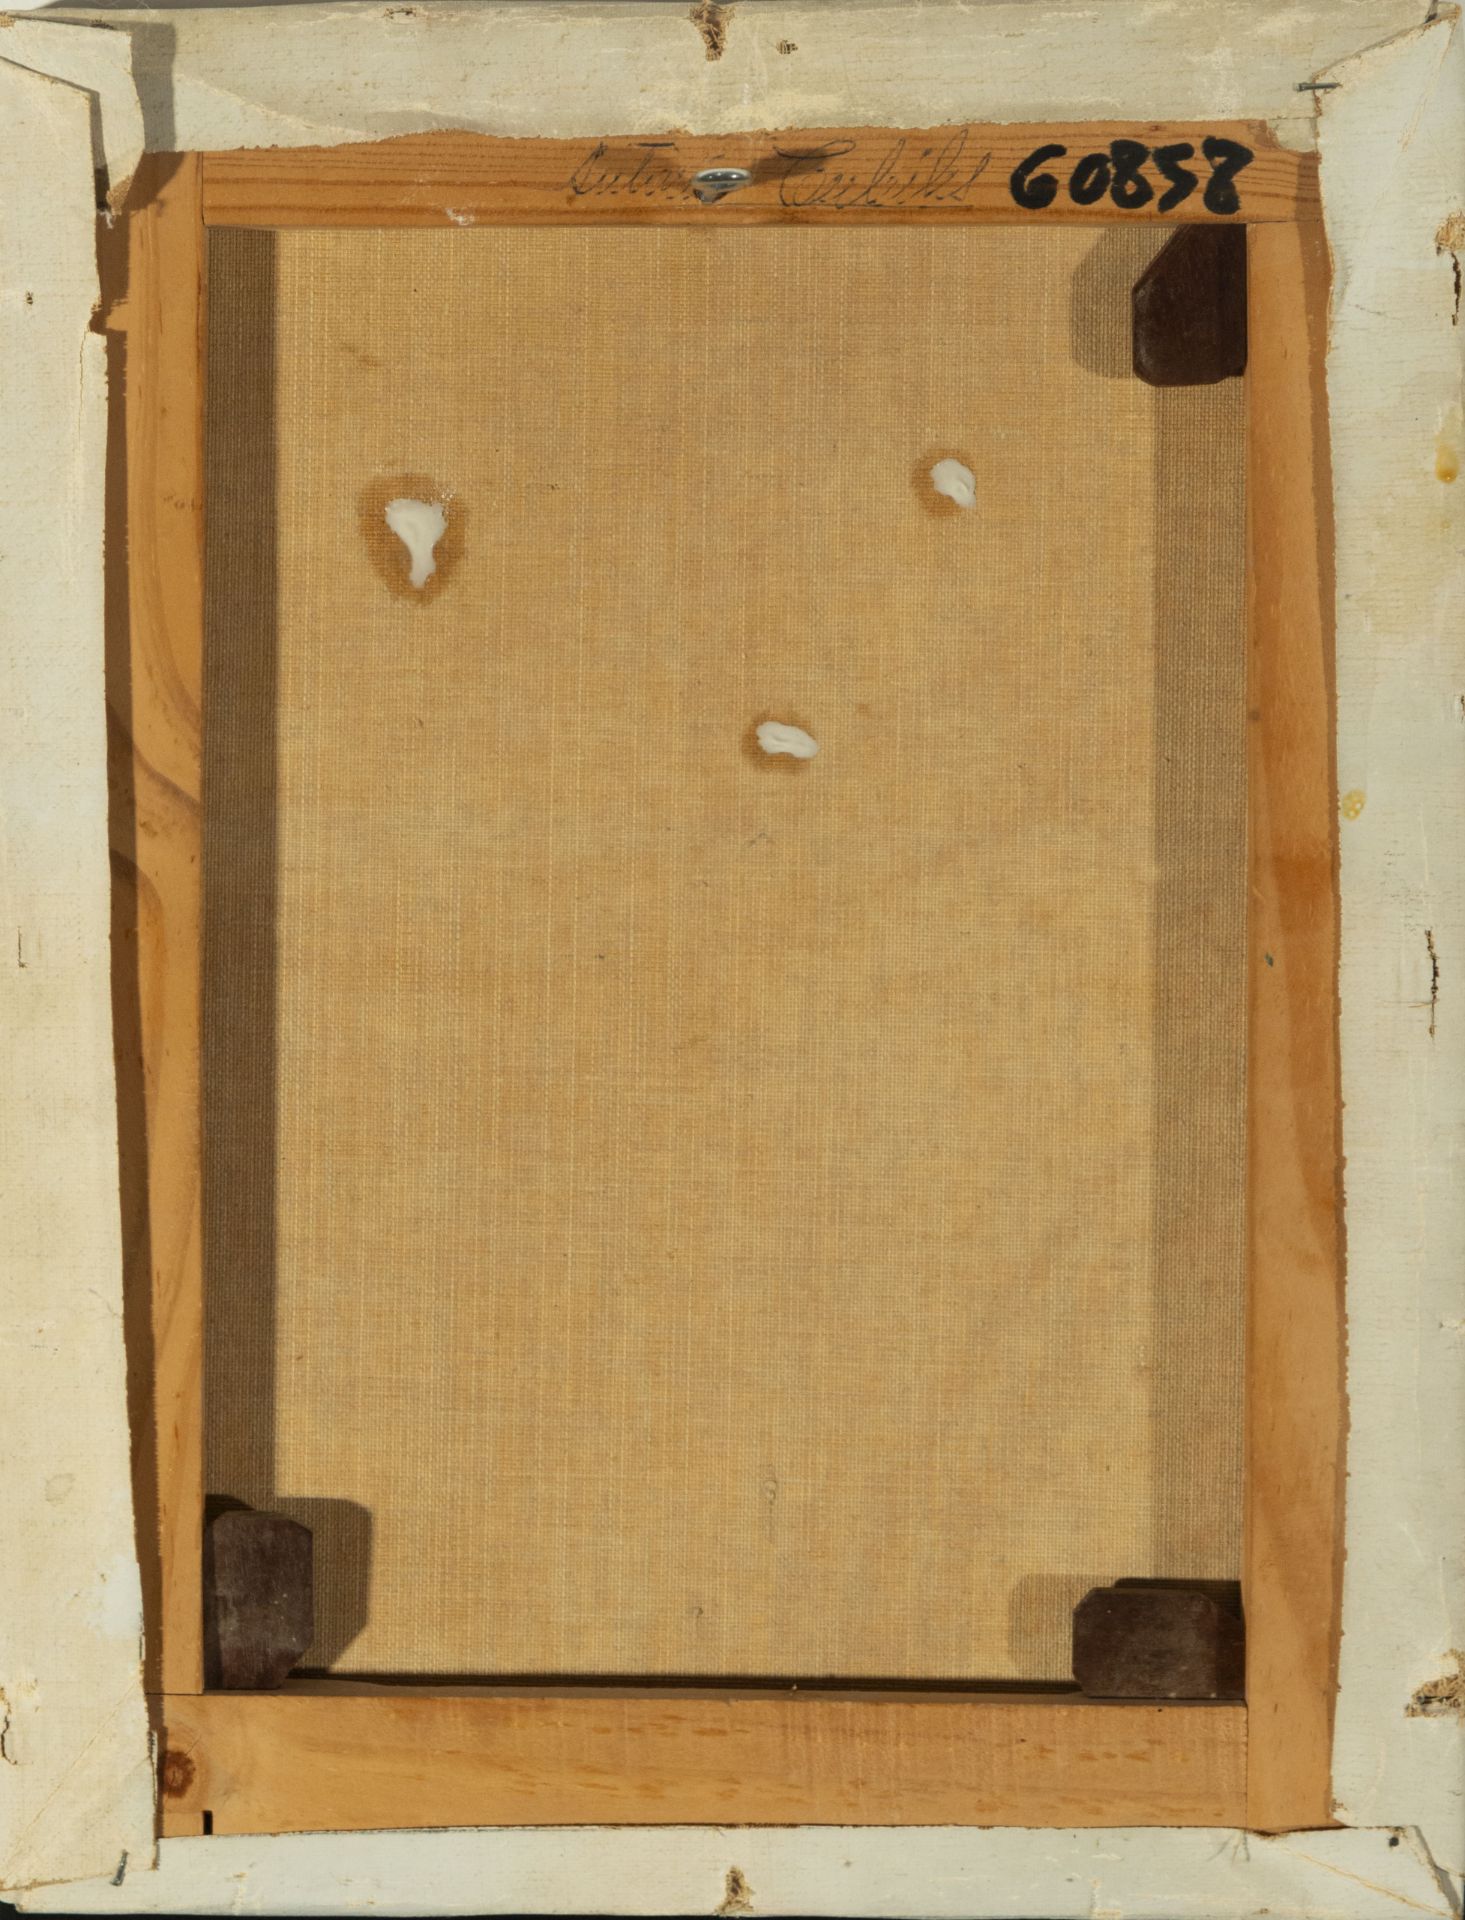 Pair of Goyesque Parsonnages, signed R. Ressendi, 20th century Spanish school - Image 8 of 8